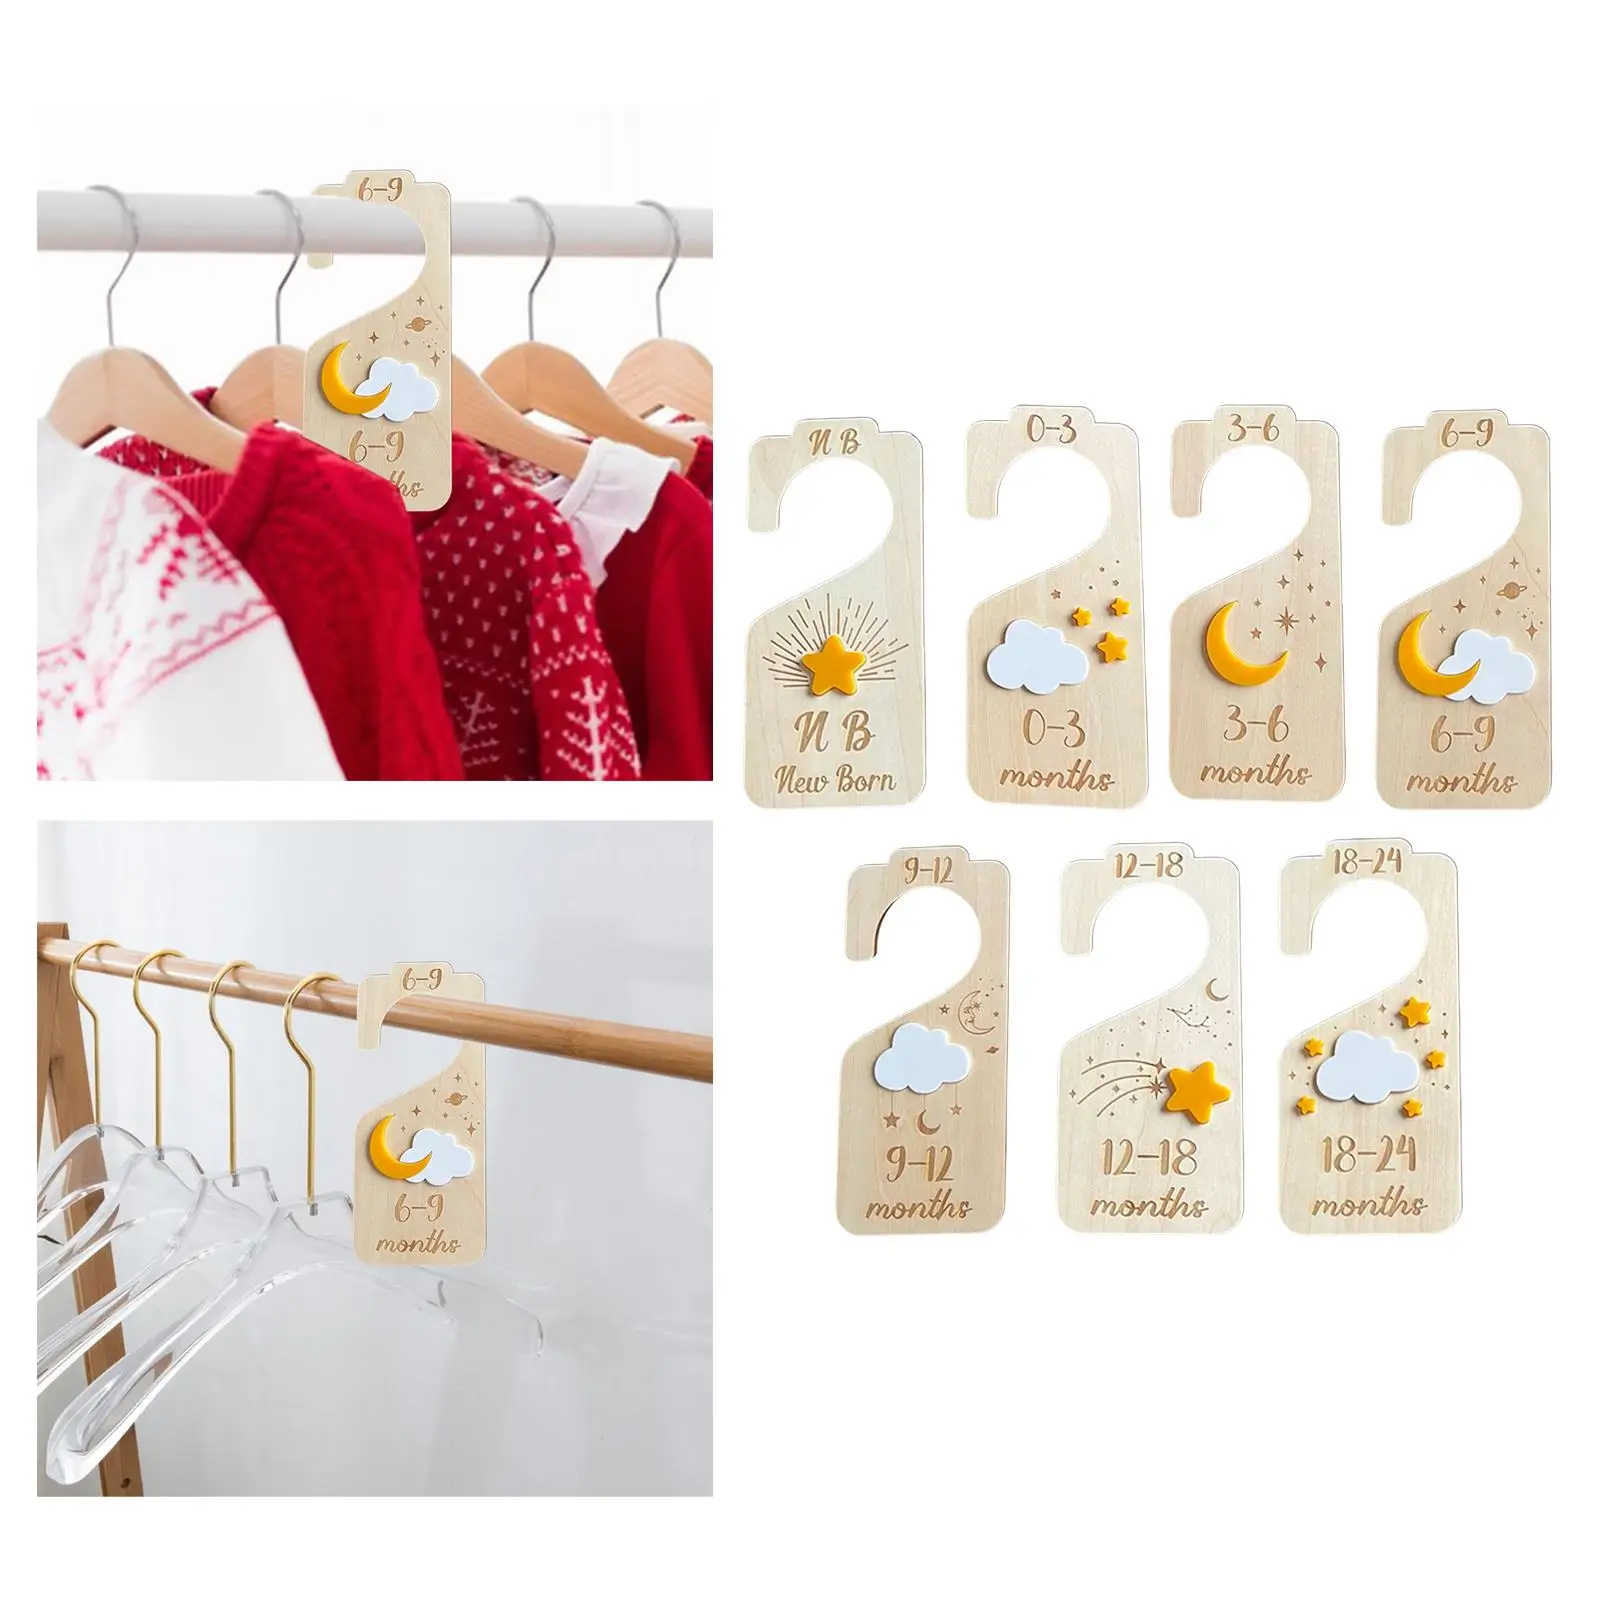 7x Baby Closet Organizer from Newborn to 24 Months Nursery Decor Wood Hanger Dividers Infant Wardrobe Divider for Mom Gifts